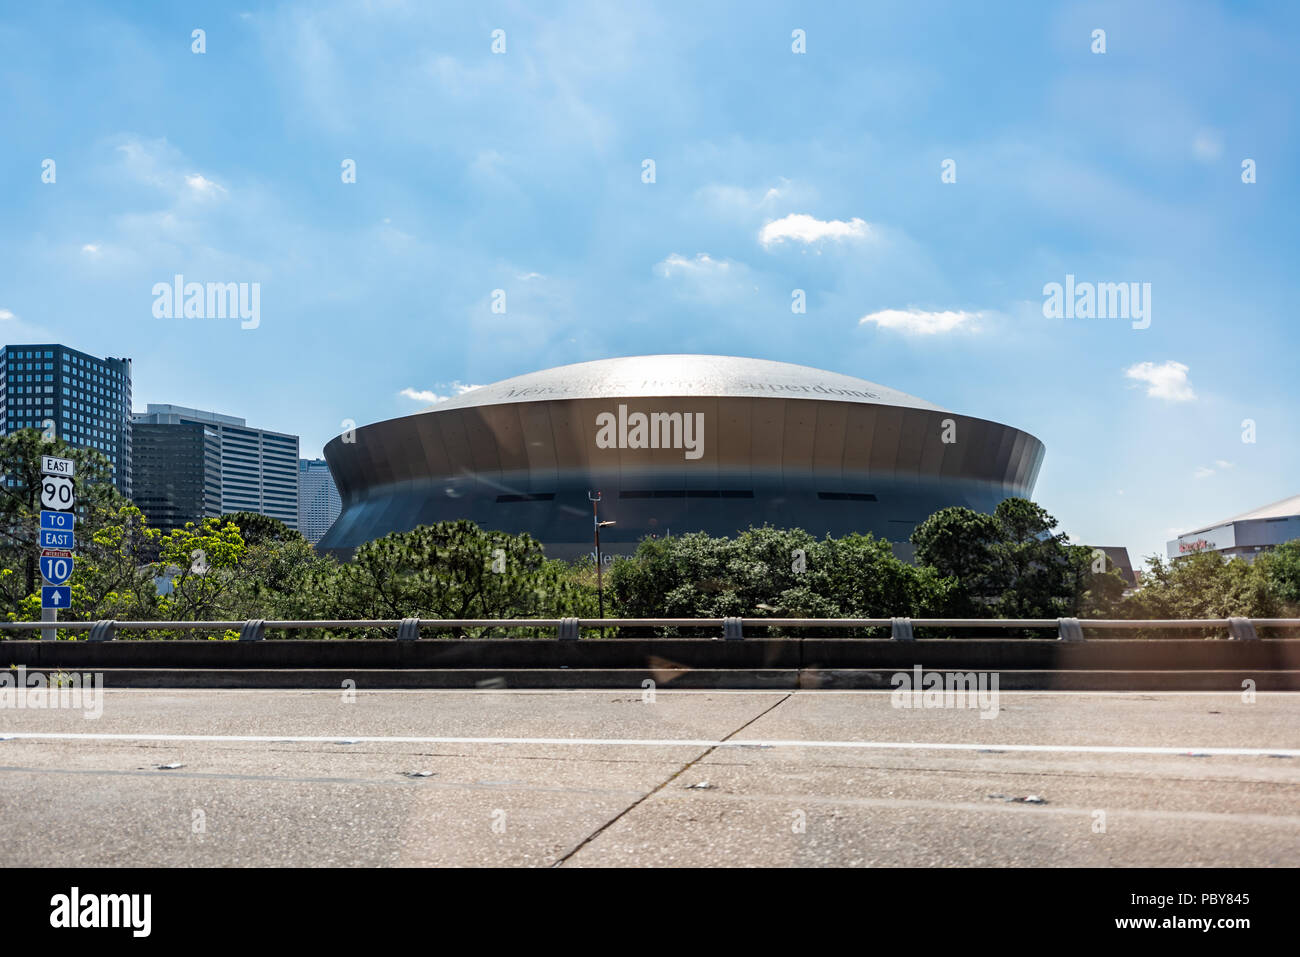 New Orleans, USA - April 23, 2018: Famous Mercedes-Benz Superdome stadium in Louisiana with road signs, sunny day Stock Photo